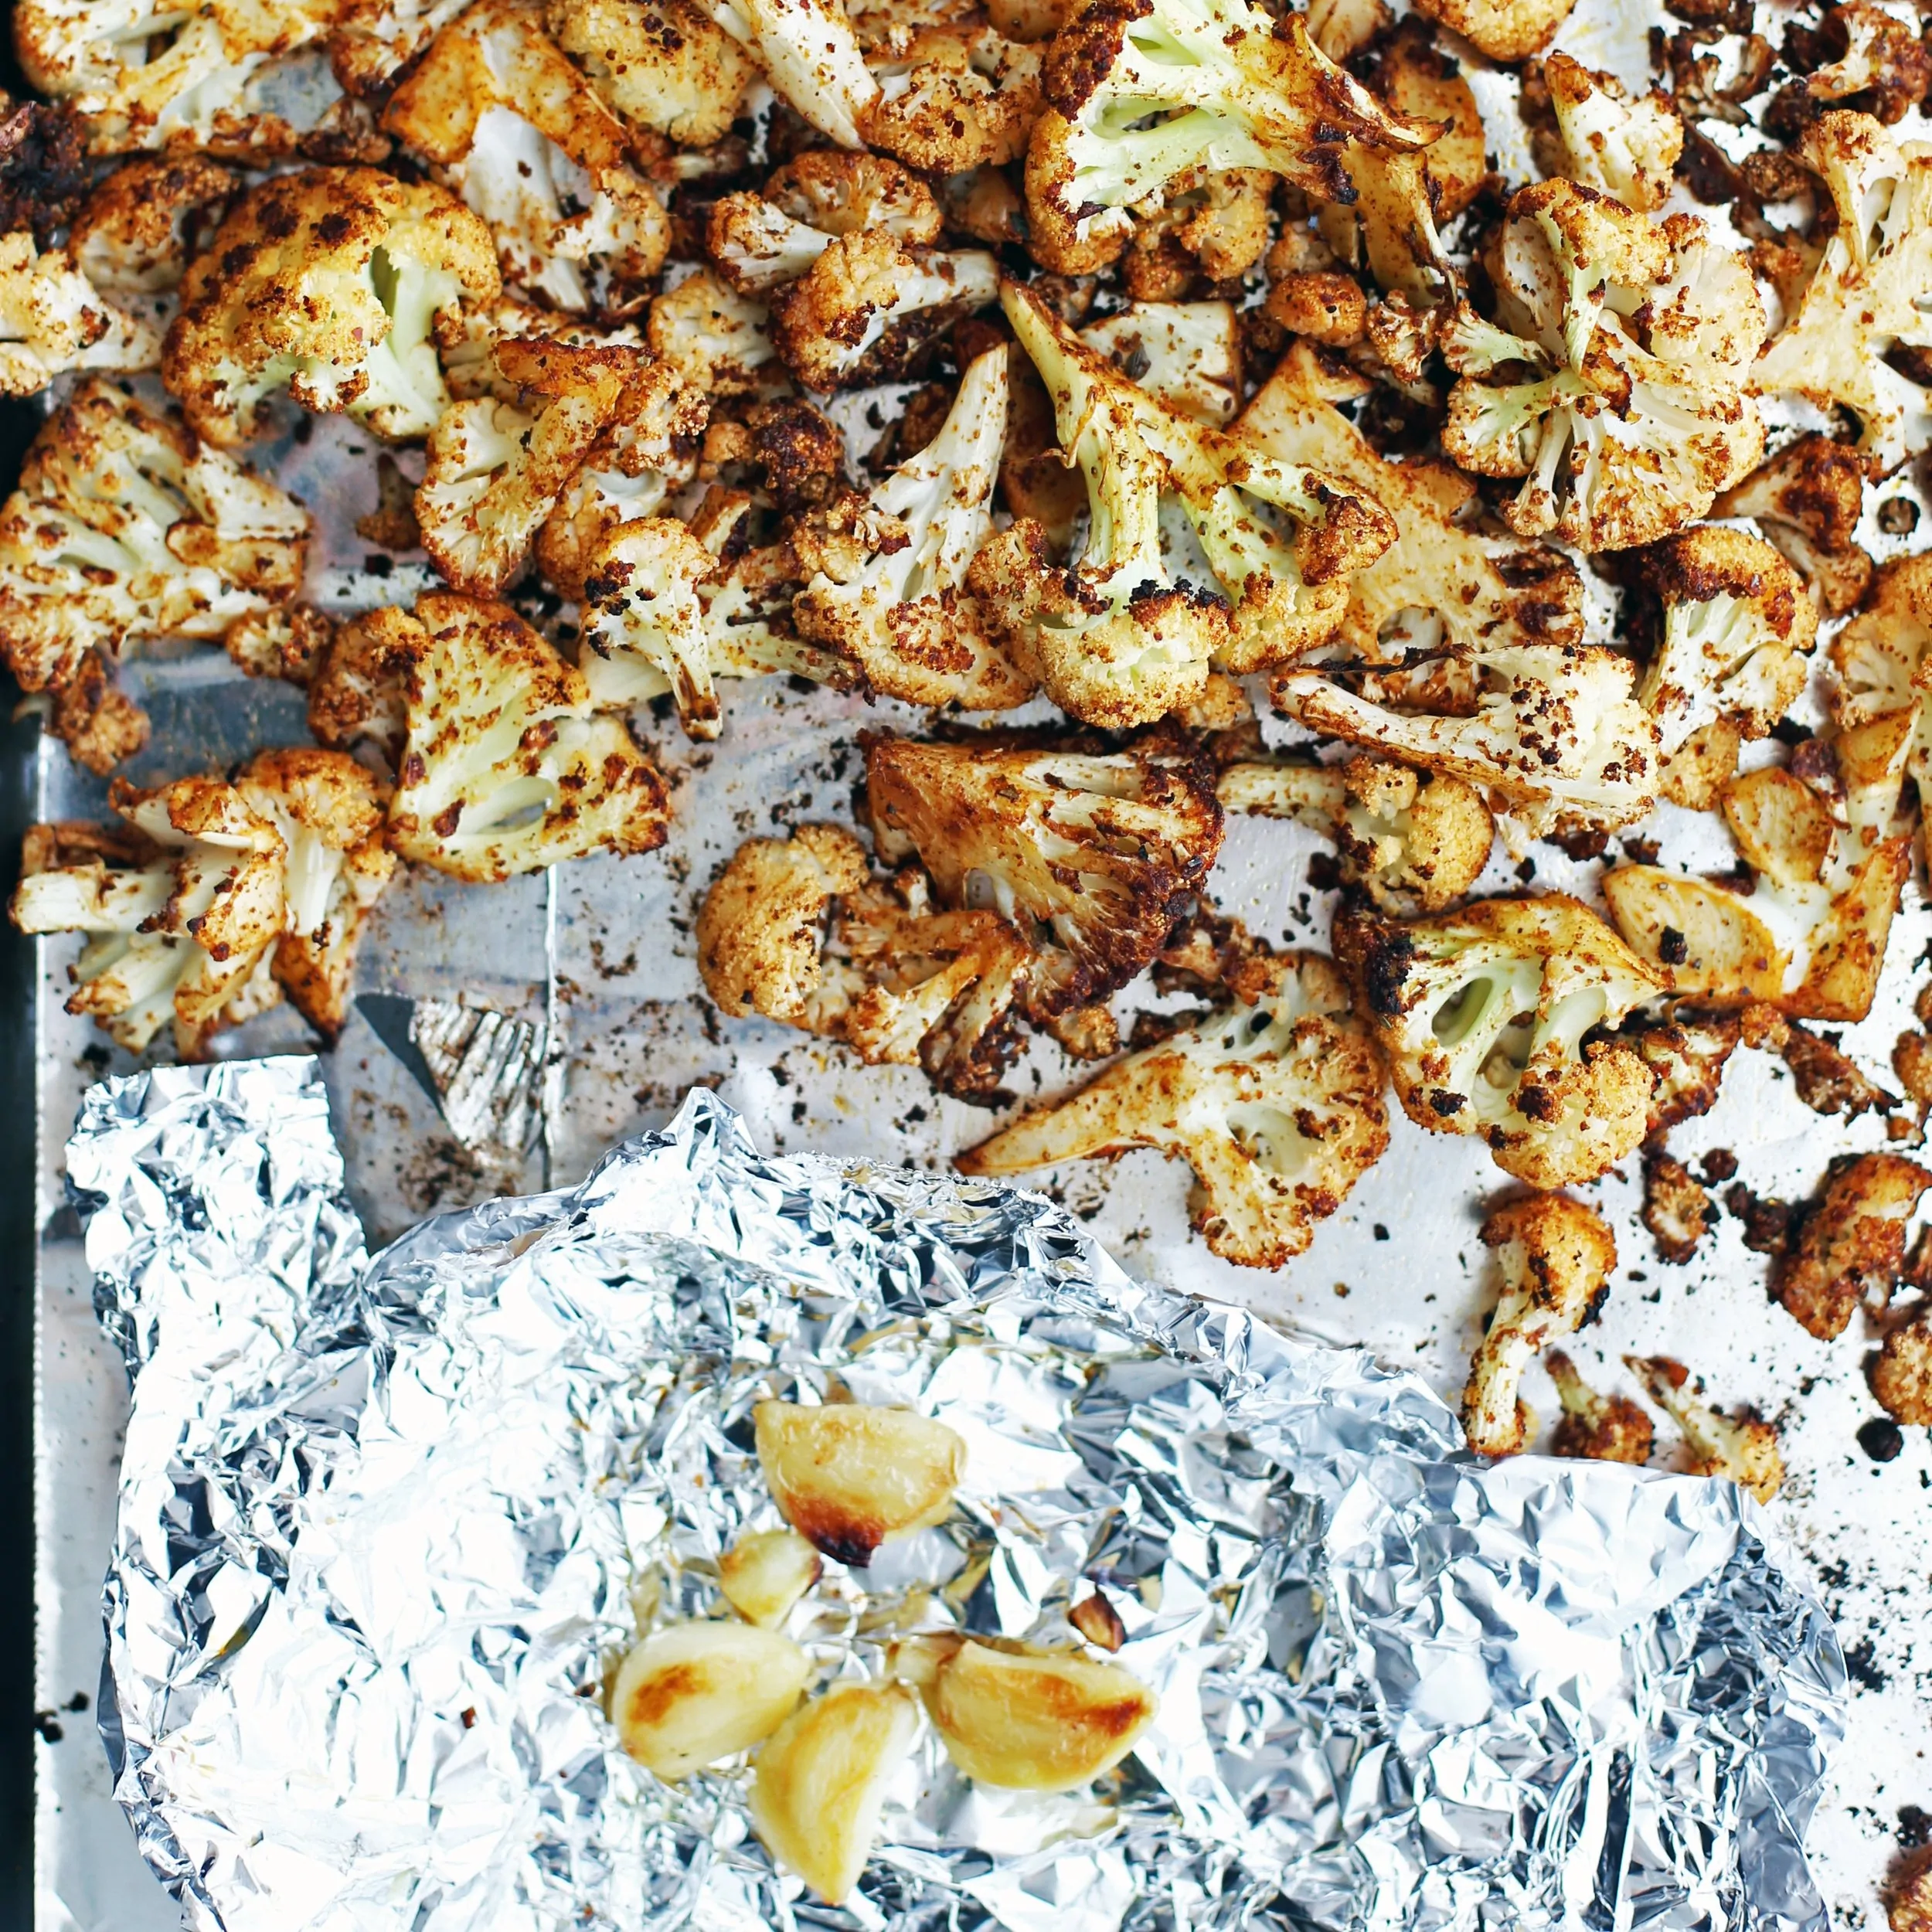 Roasted spiced cauliflower florets and roasted garlic cloves on a baking sheet.